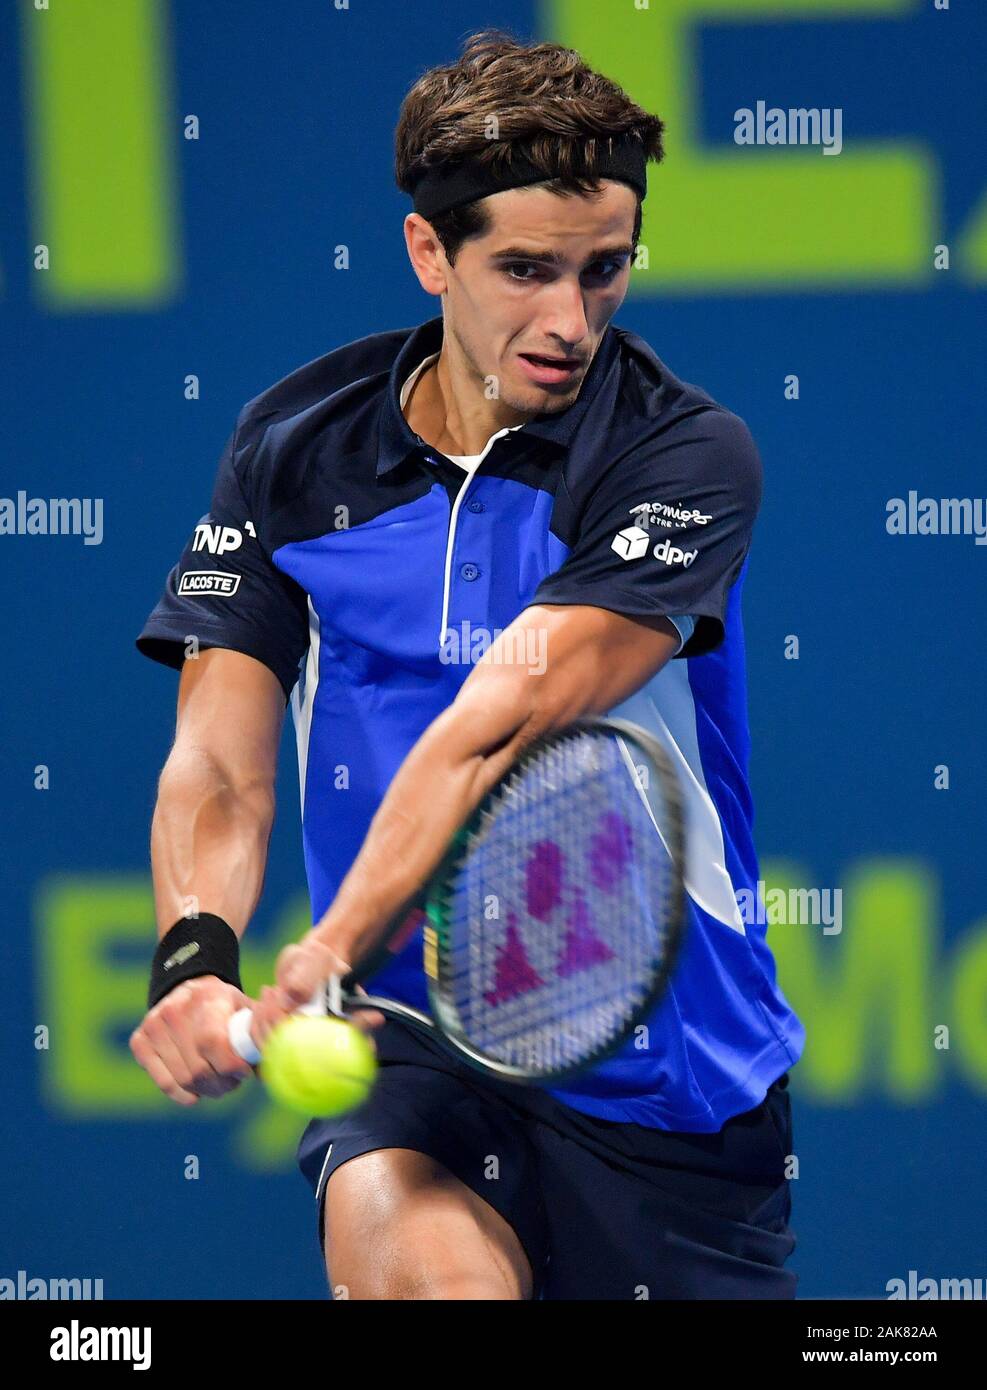 Doha. 7th Jan, 2020. Pierre-Hugues Herbert of France returns the ball  during the first round match against Marco Cecchinato of Italy at the ATP  Qatar Open tennis tournament at the Khalifa International